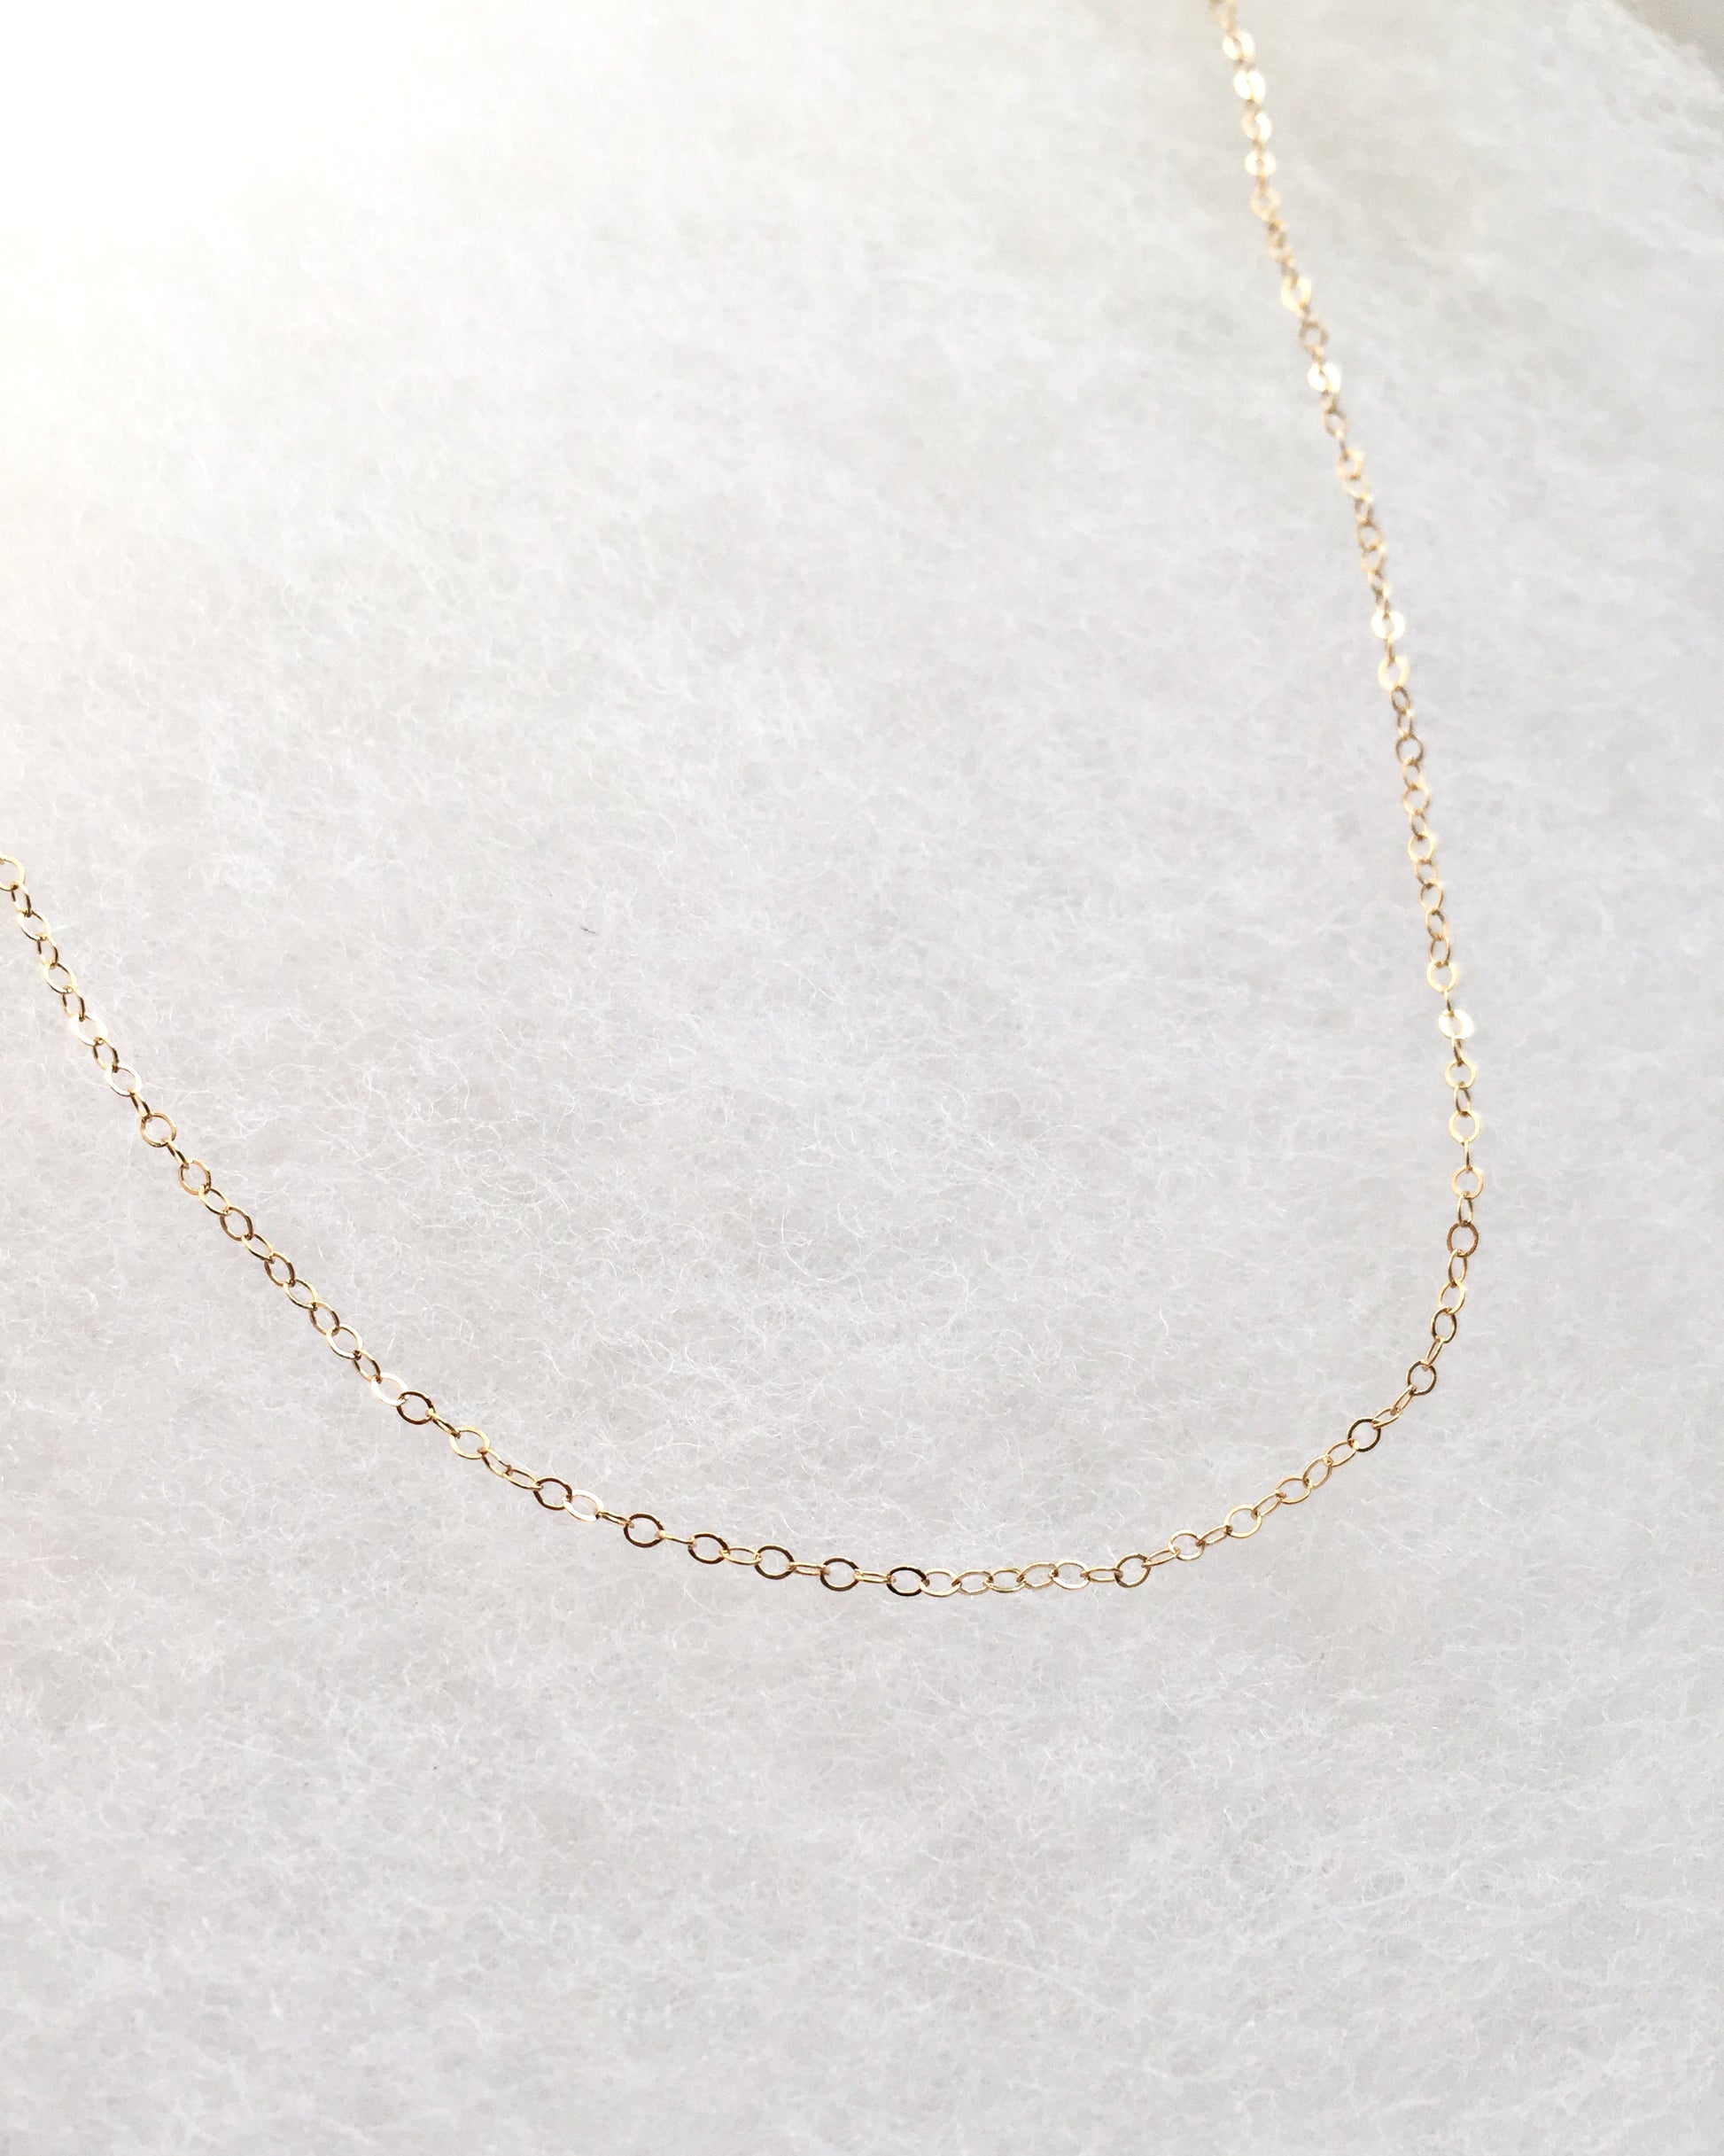 Dainty Short Chain Necklace in Gold Filled or Sterling Silver | IB Jewelry